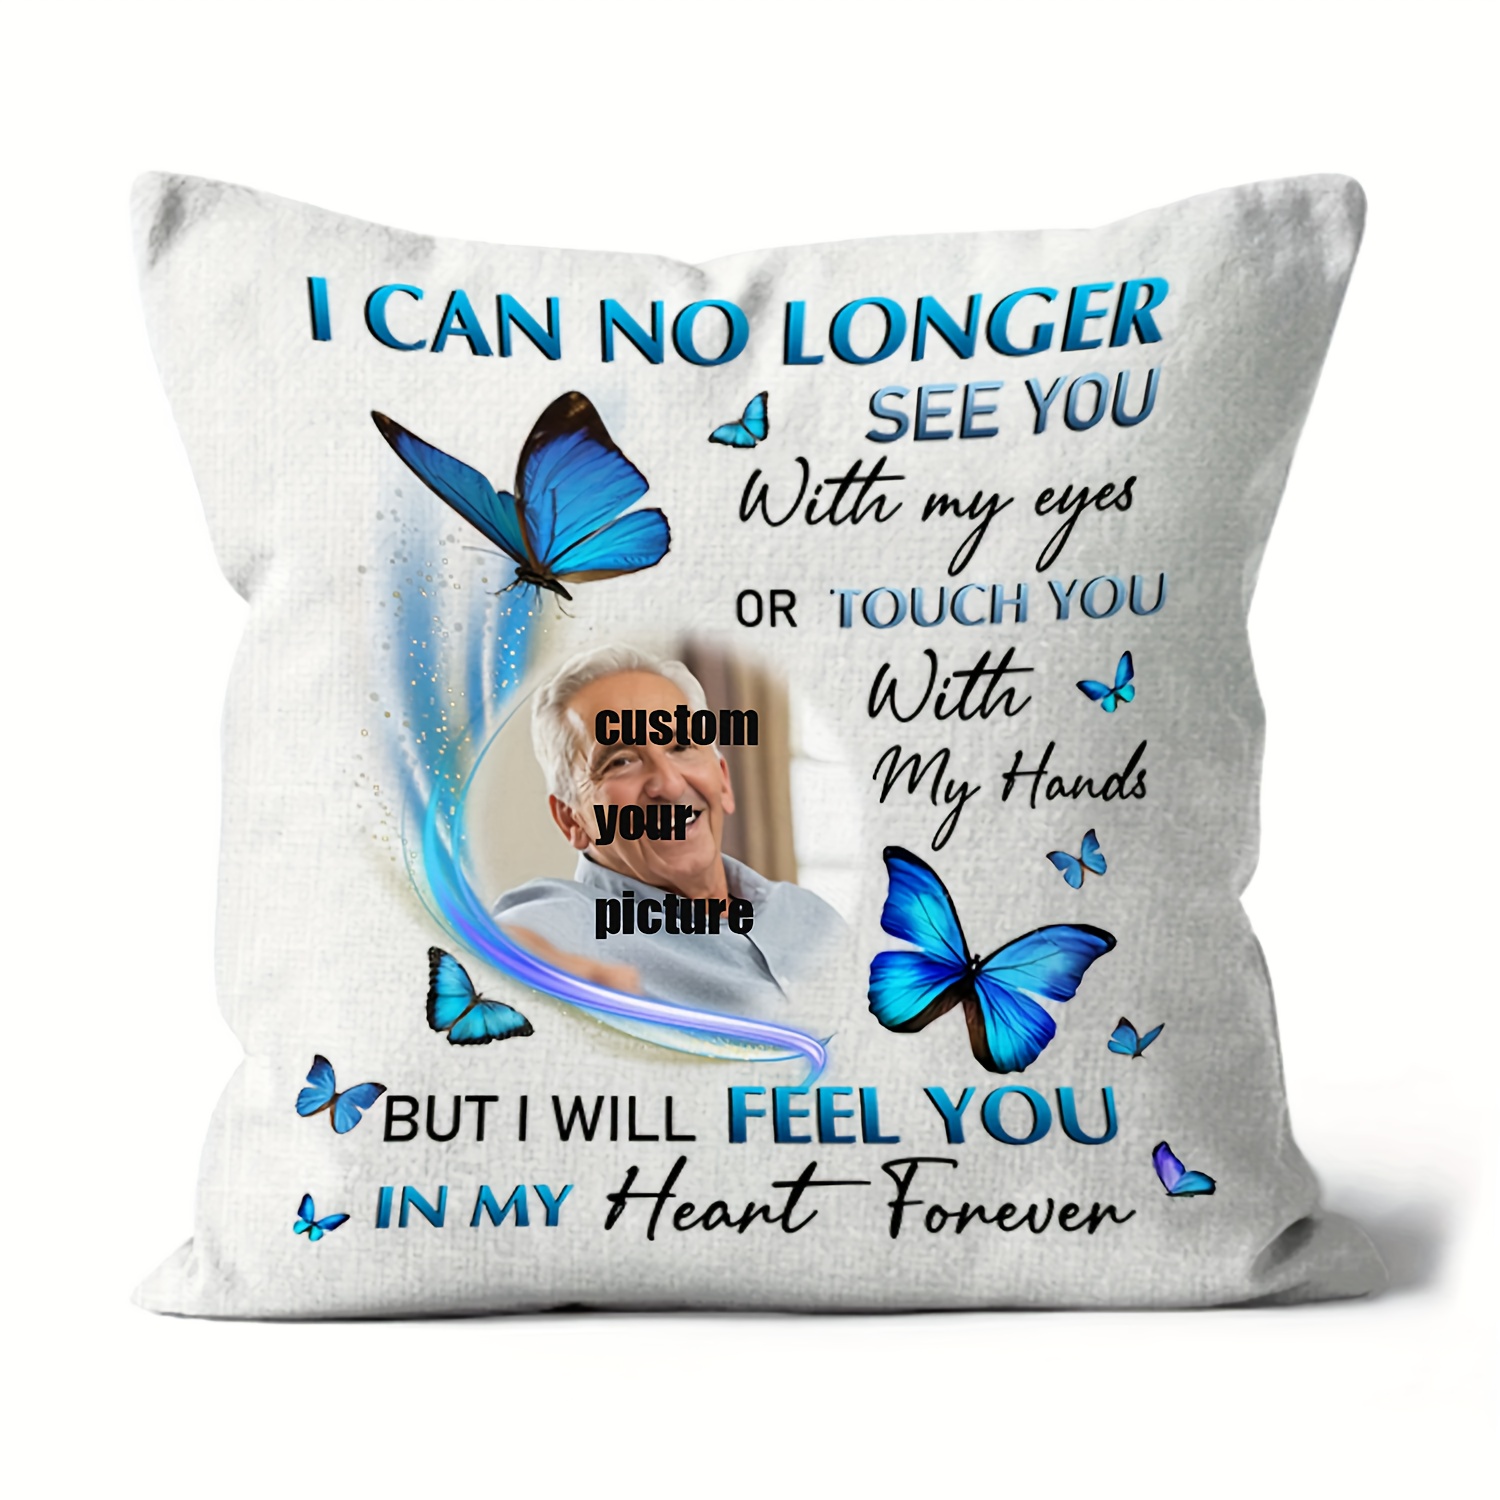 

(customized) Personalized 18x18 Inch Super Soft Short Plush Throw Pillow Personalized Memorial Pillow, No Longer See You Remembrance For Loss Of Loved 1 In Heaven Sympathy (no Pillow Core)